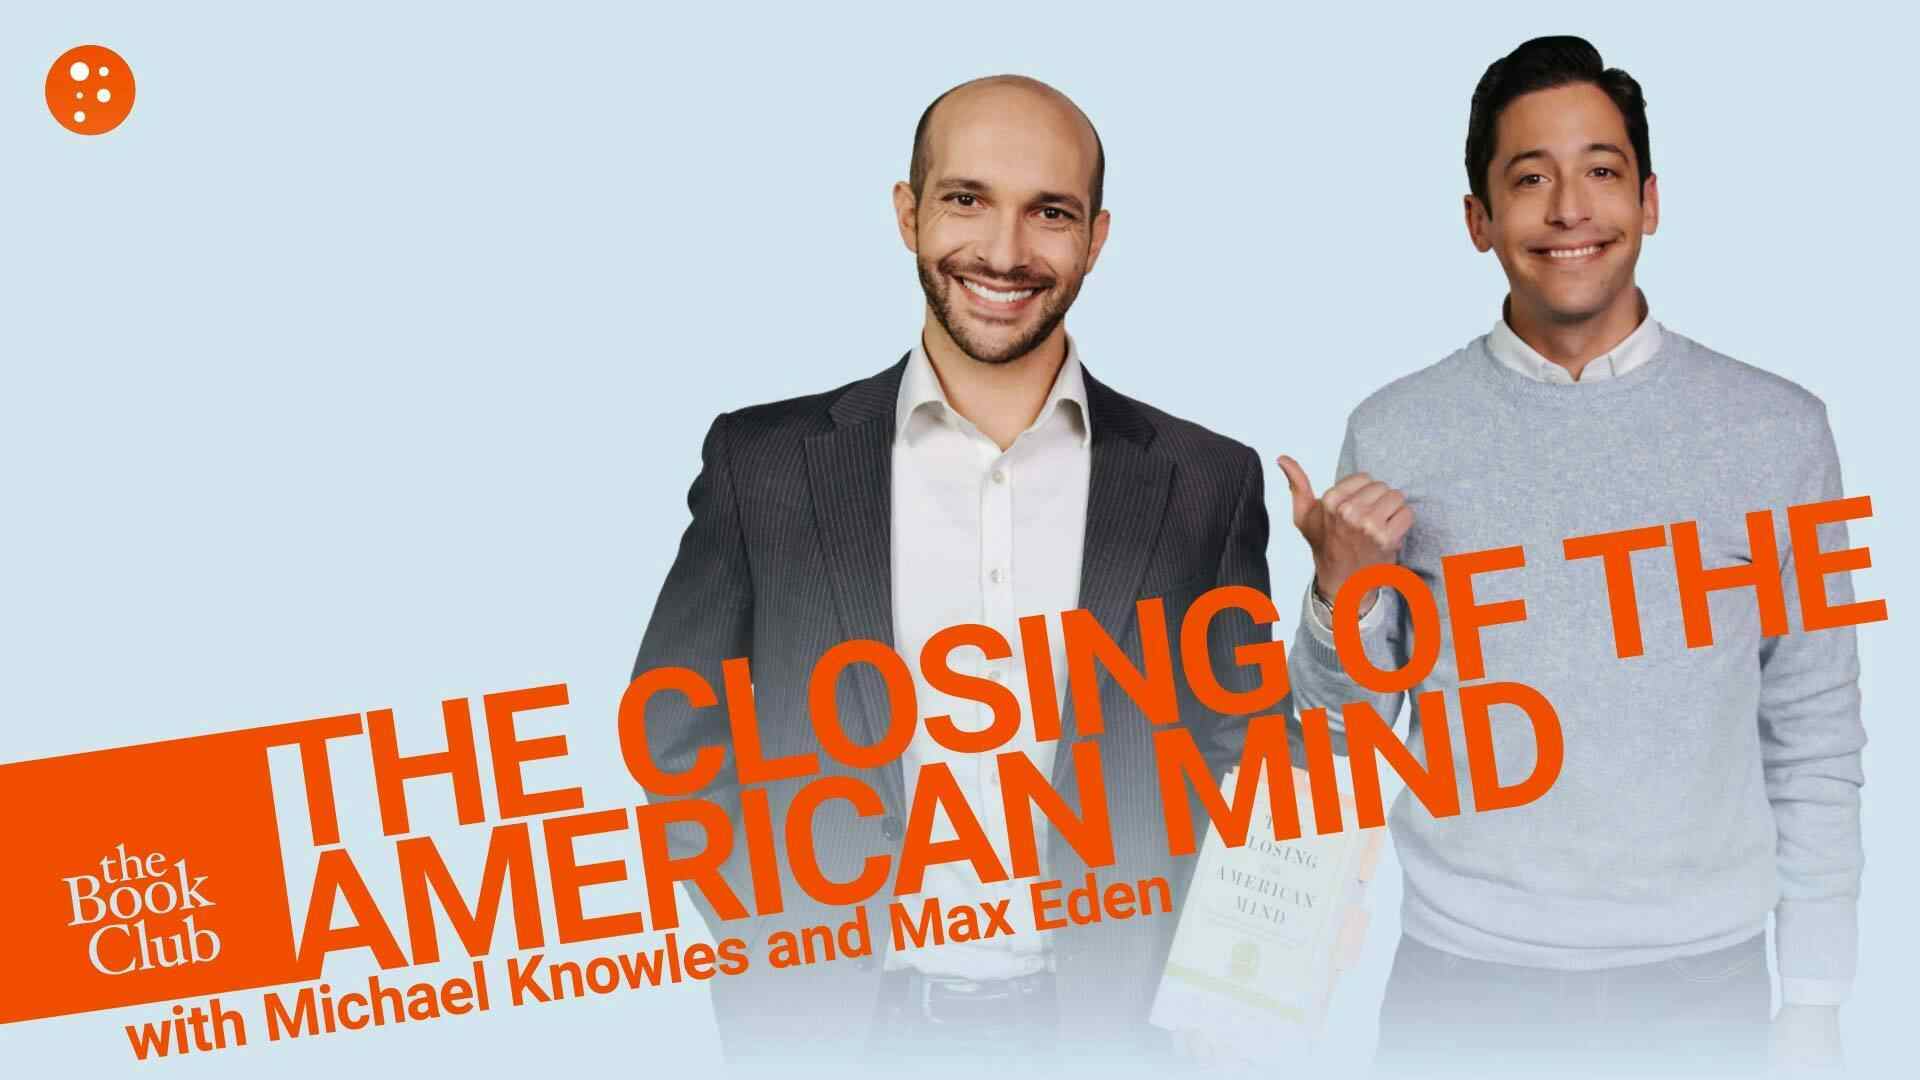 Max Eden: The Closing of the American Mind by Allan Bloom